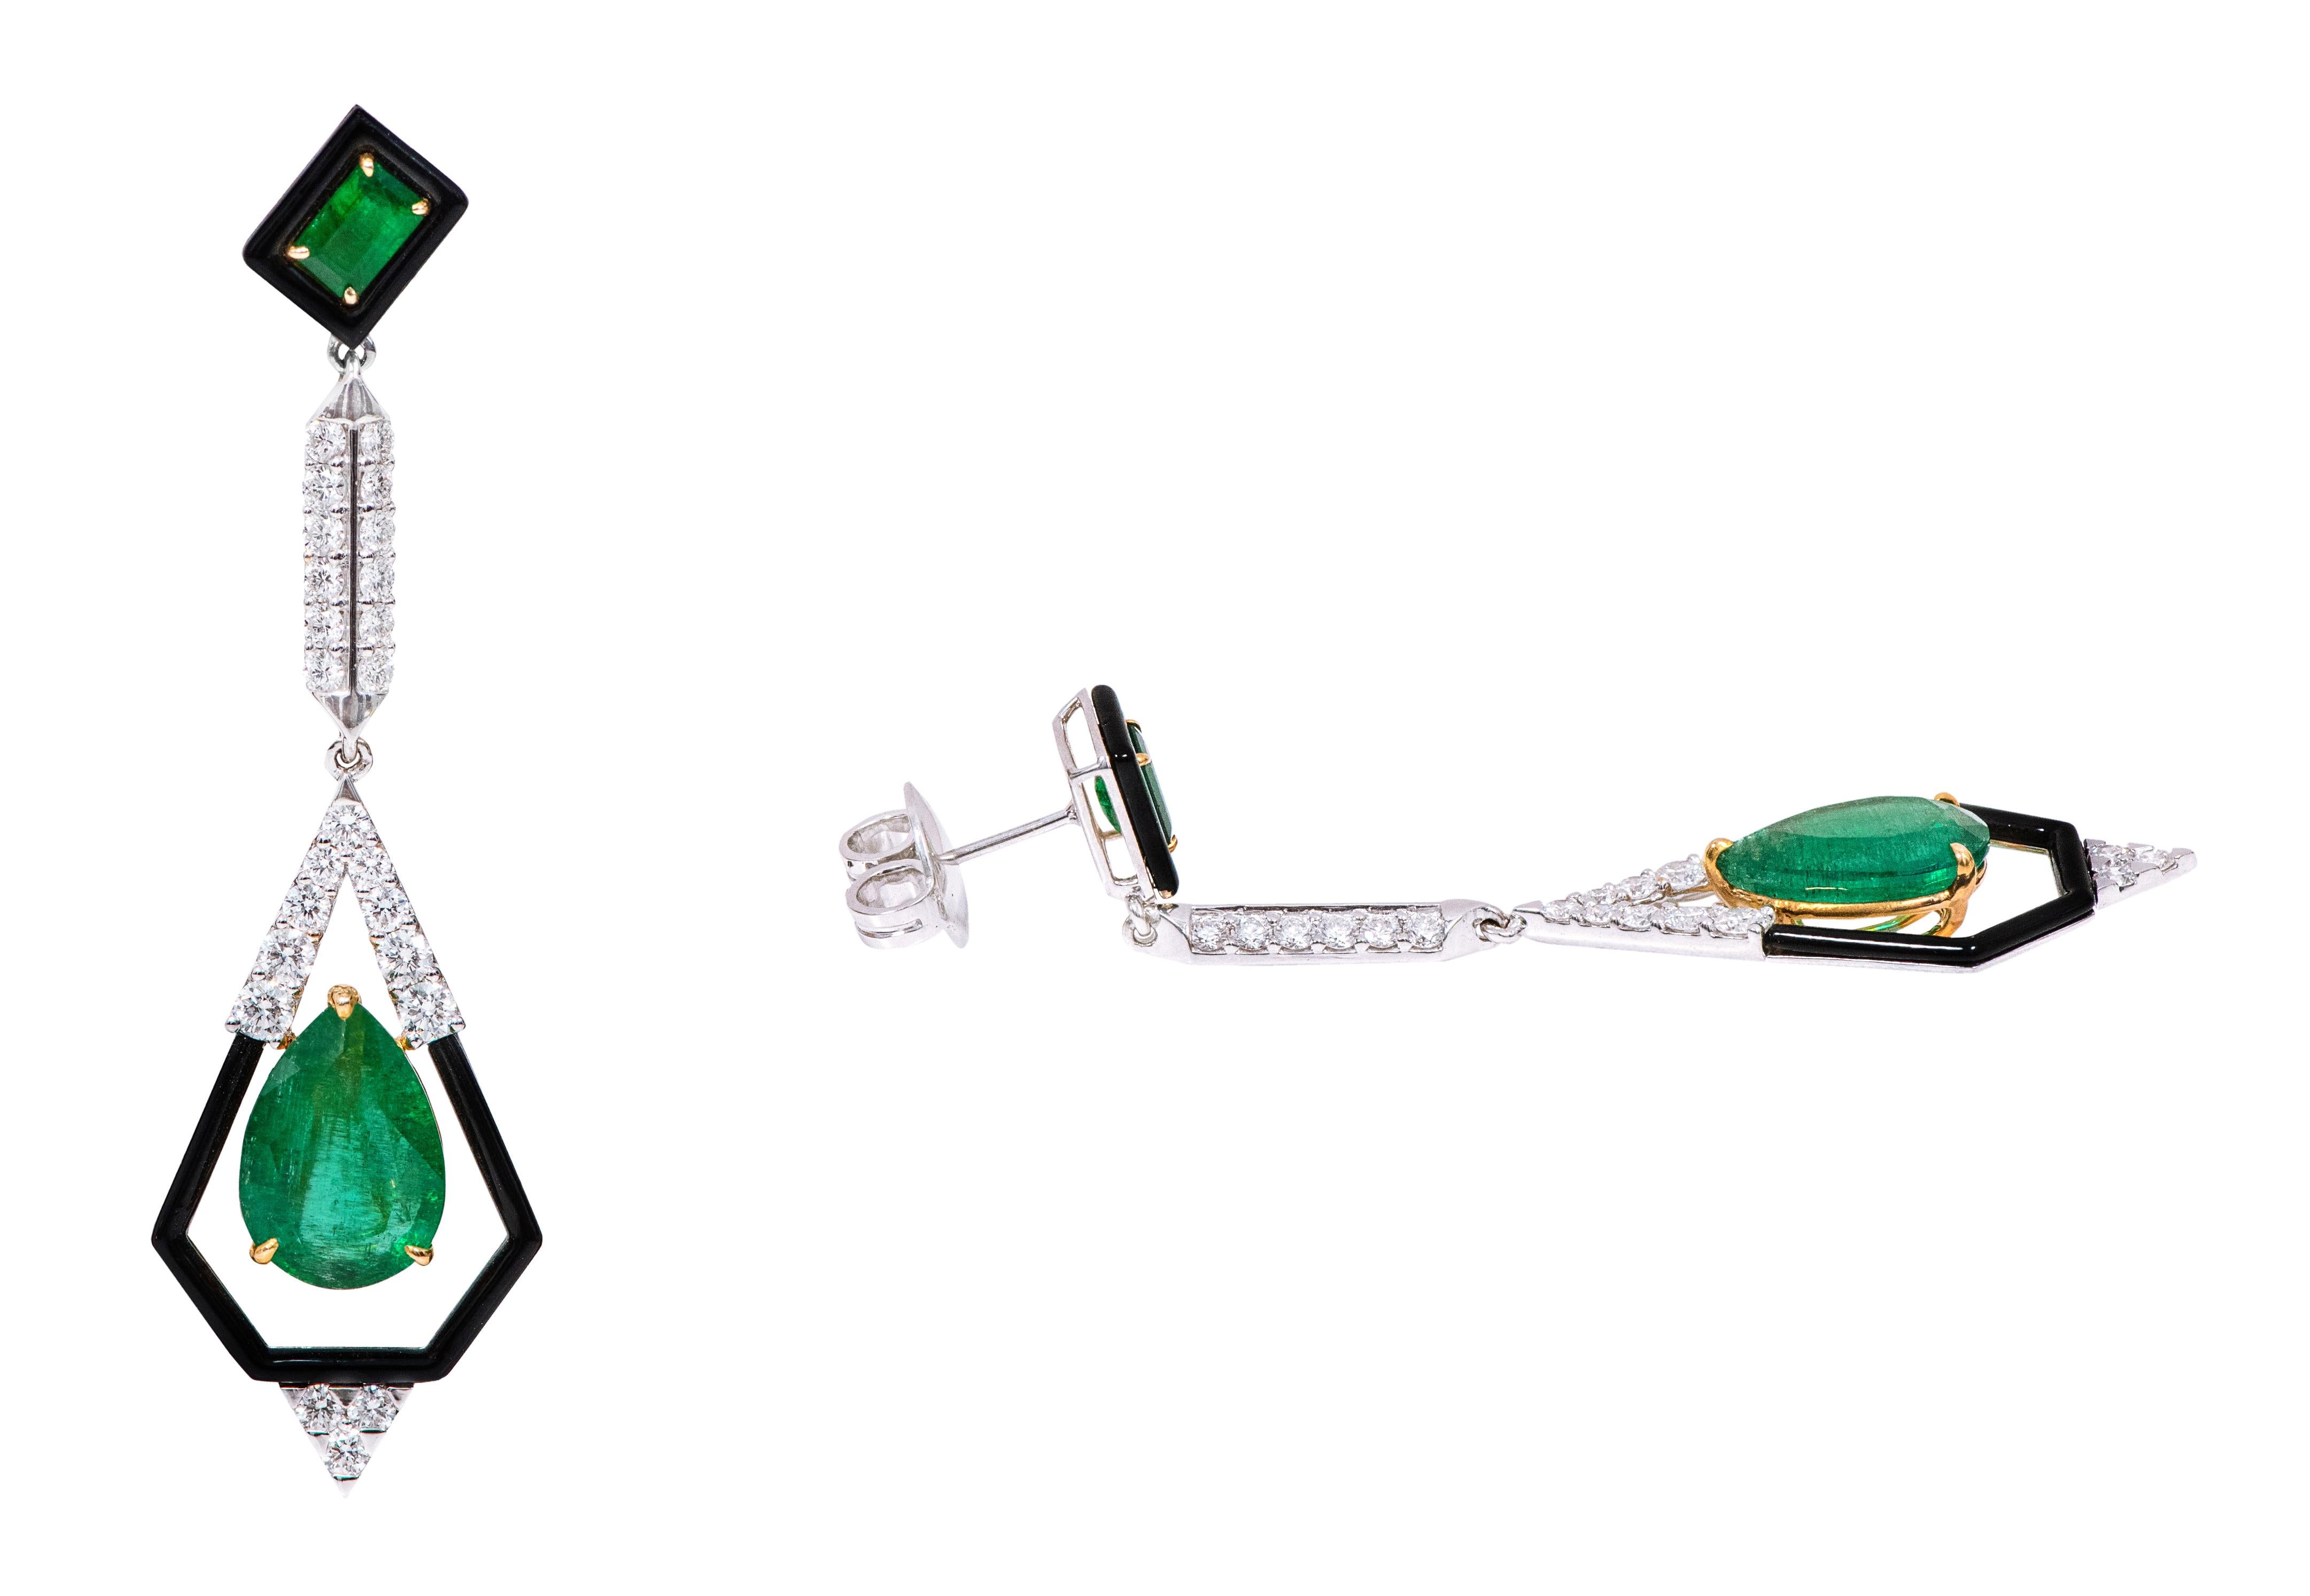 18 Karat Gold Natural Emerald, Diamond, and Black Enamel Dangle Earrings

This impeccable shamrock green emerald and diamond earring pair is exceptional. The pear shaped solitaire emerald in the center is exemplified with a pentagonal shaped gold